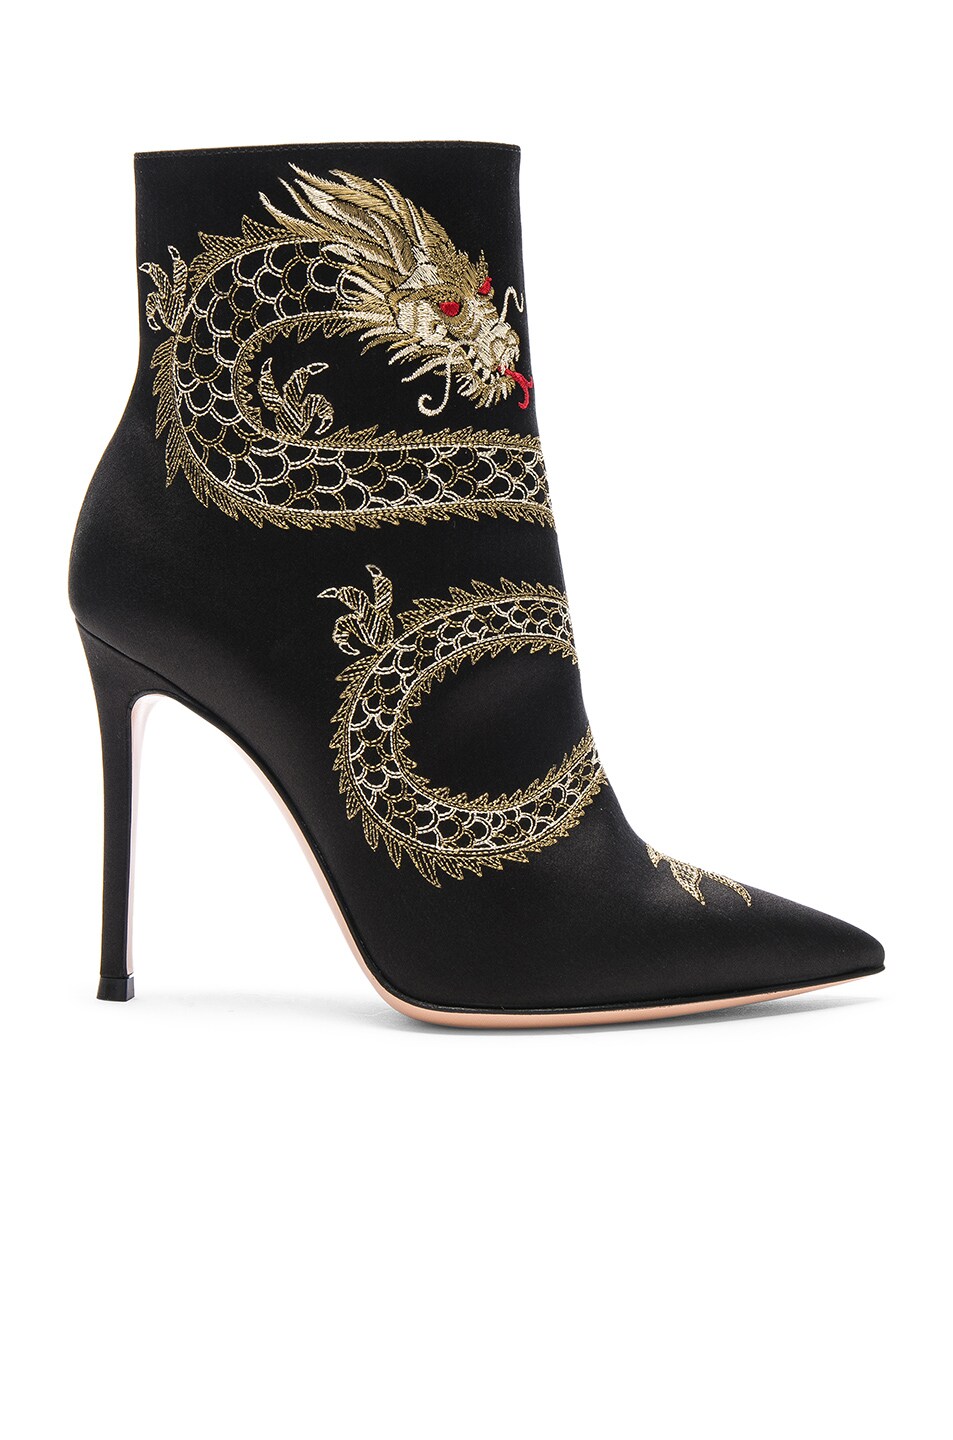 Image 1 of Gianvito Rossi Satin Embroidered Dragon Booties in Black